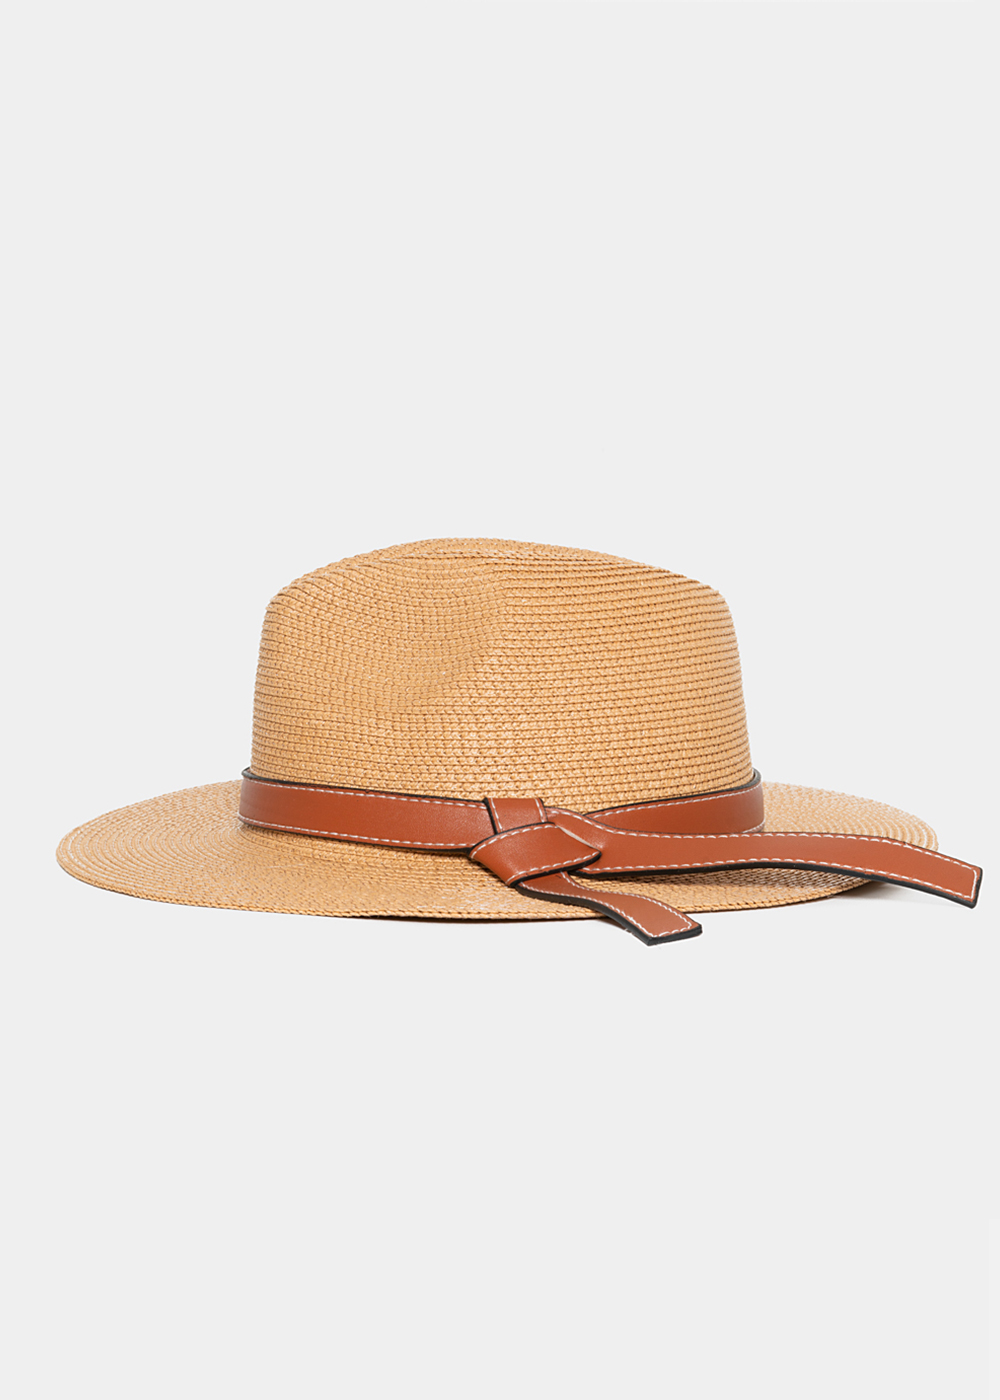 brown straw panama with camel leather belt